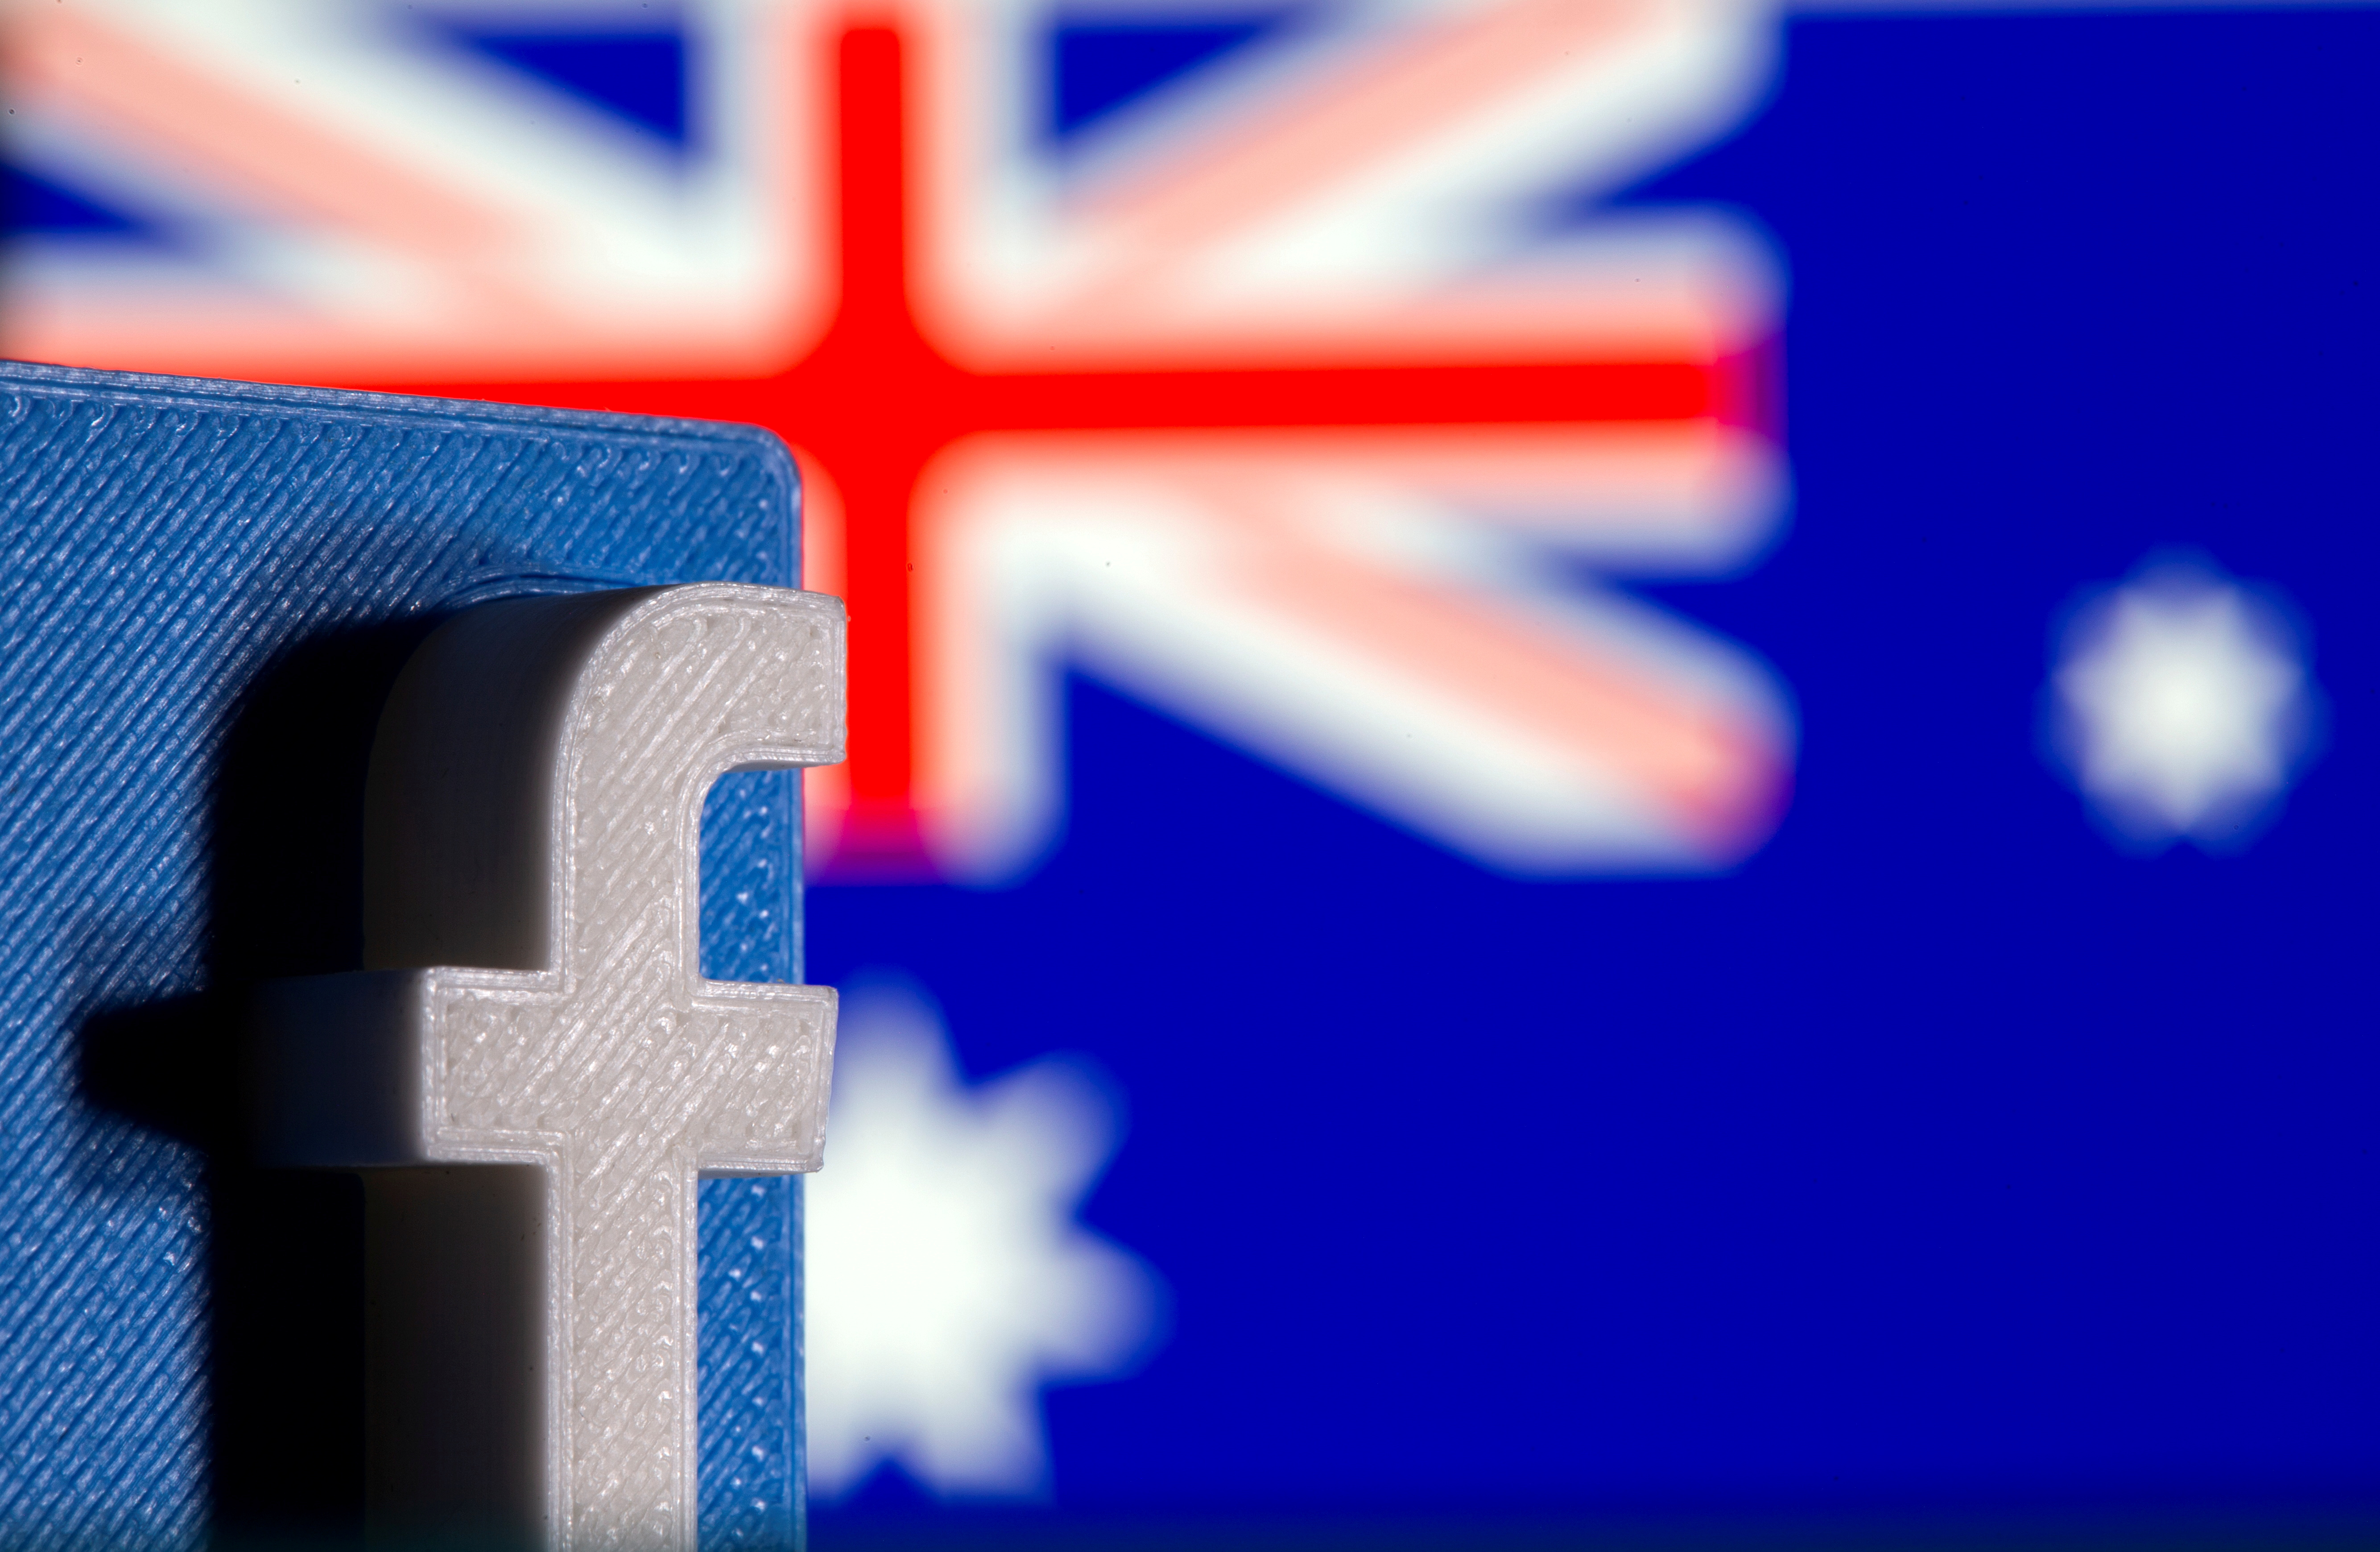 A 3D printed Facebook logo is seen in front of displayed Australia's flag in this illustration photo